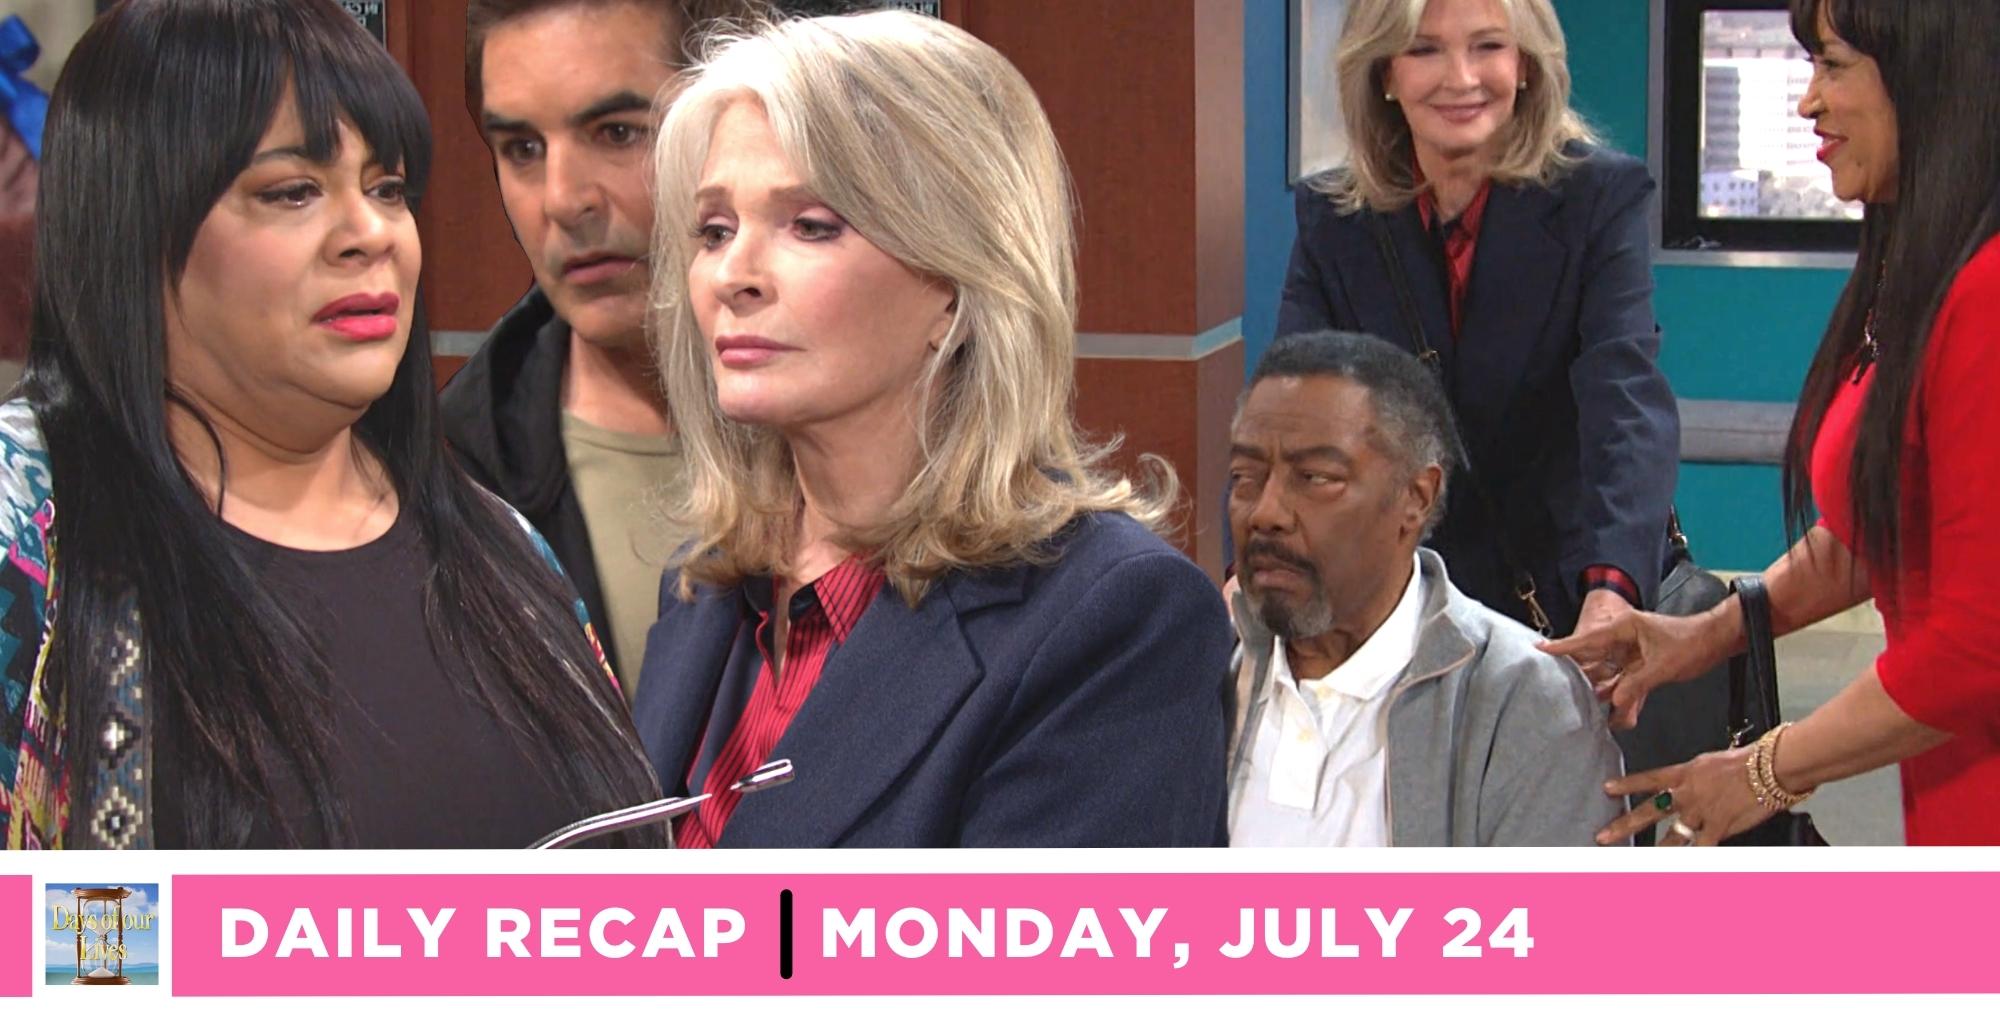 days of our lives recap for monday, july 24, 2023, collage of phots featuring marlena, whitley, rafe, paulina, and abe.